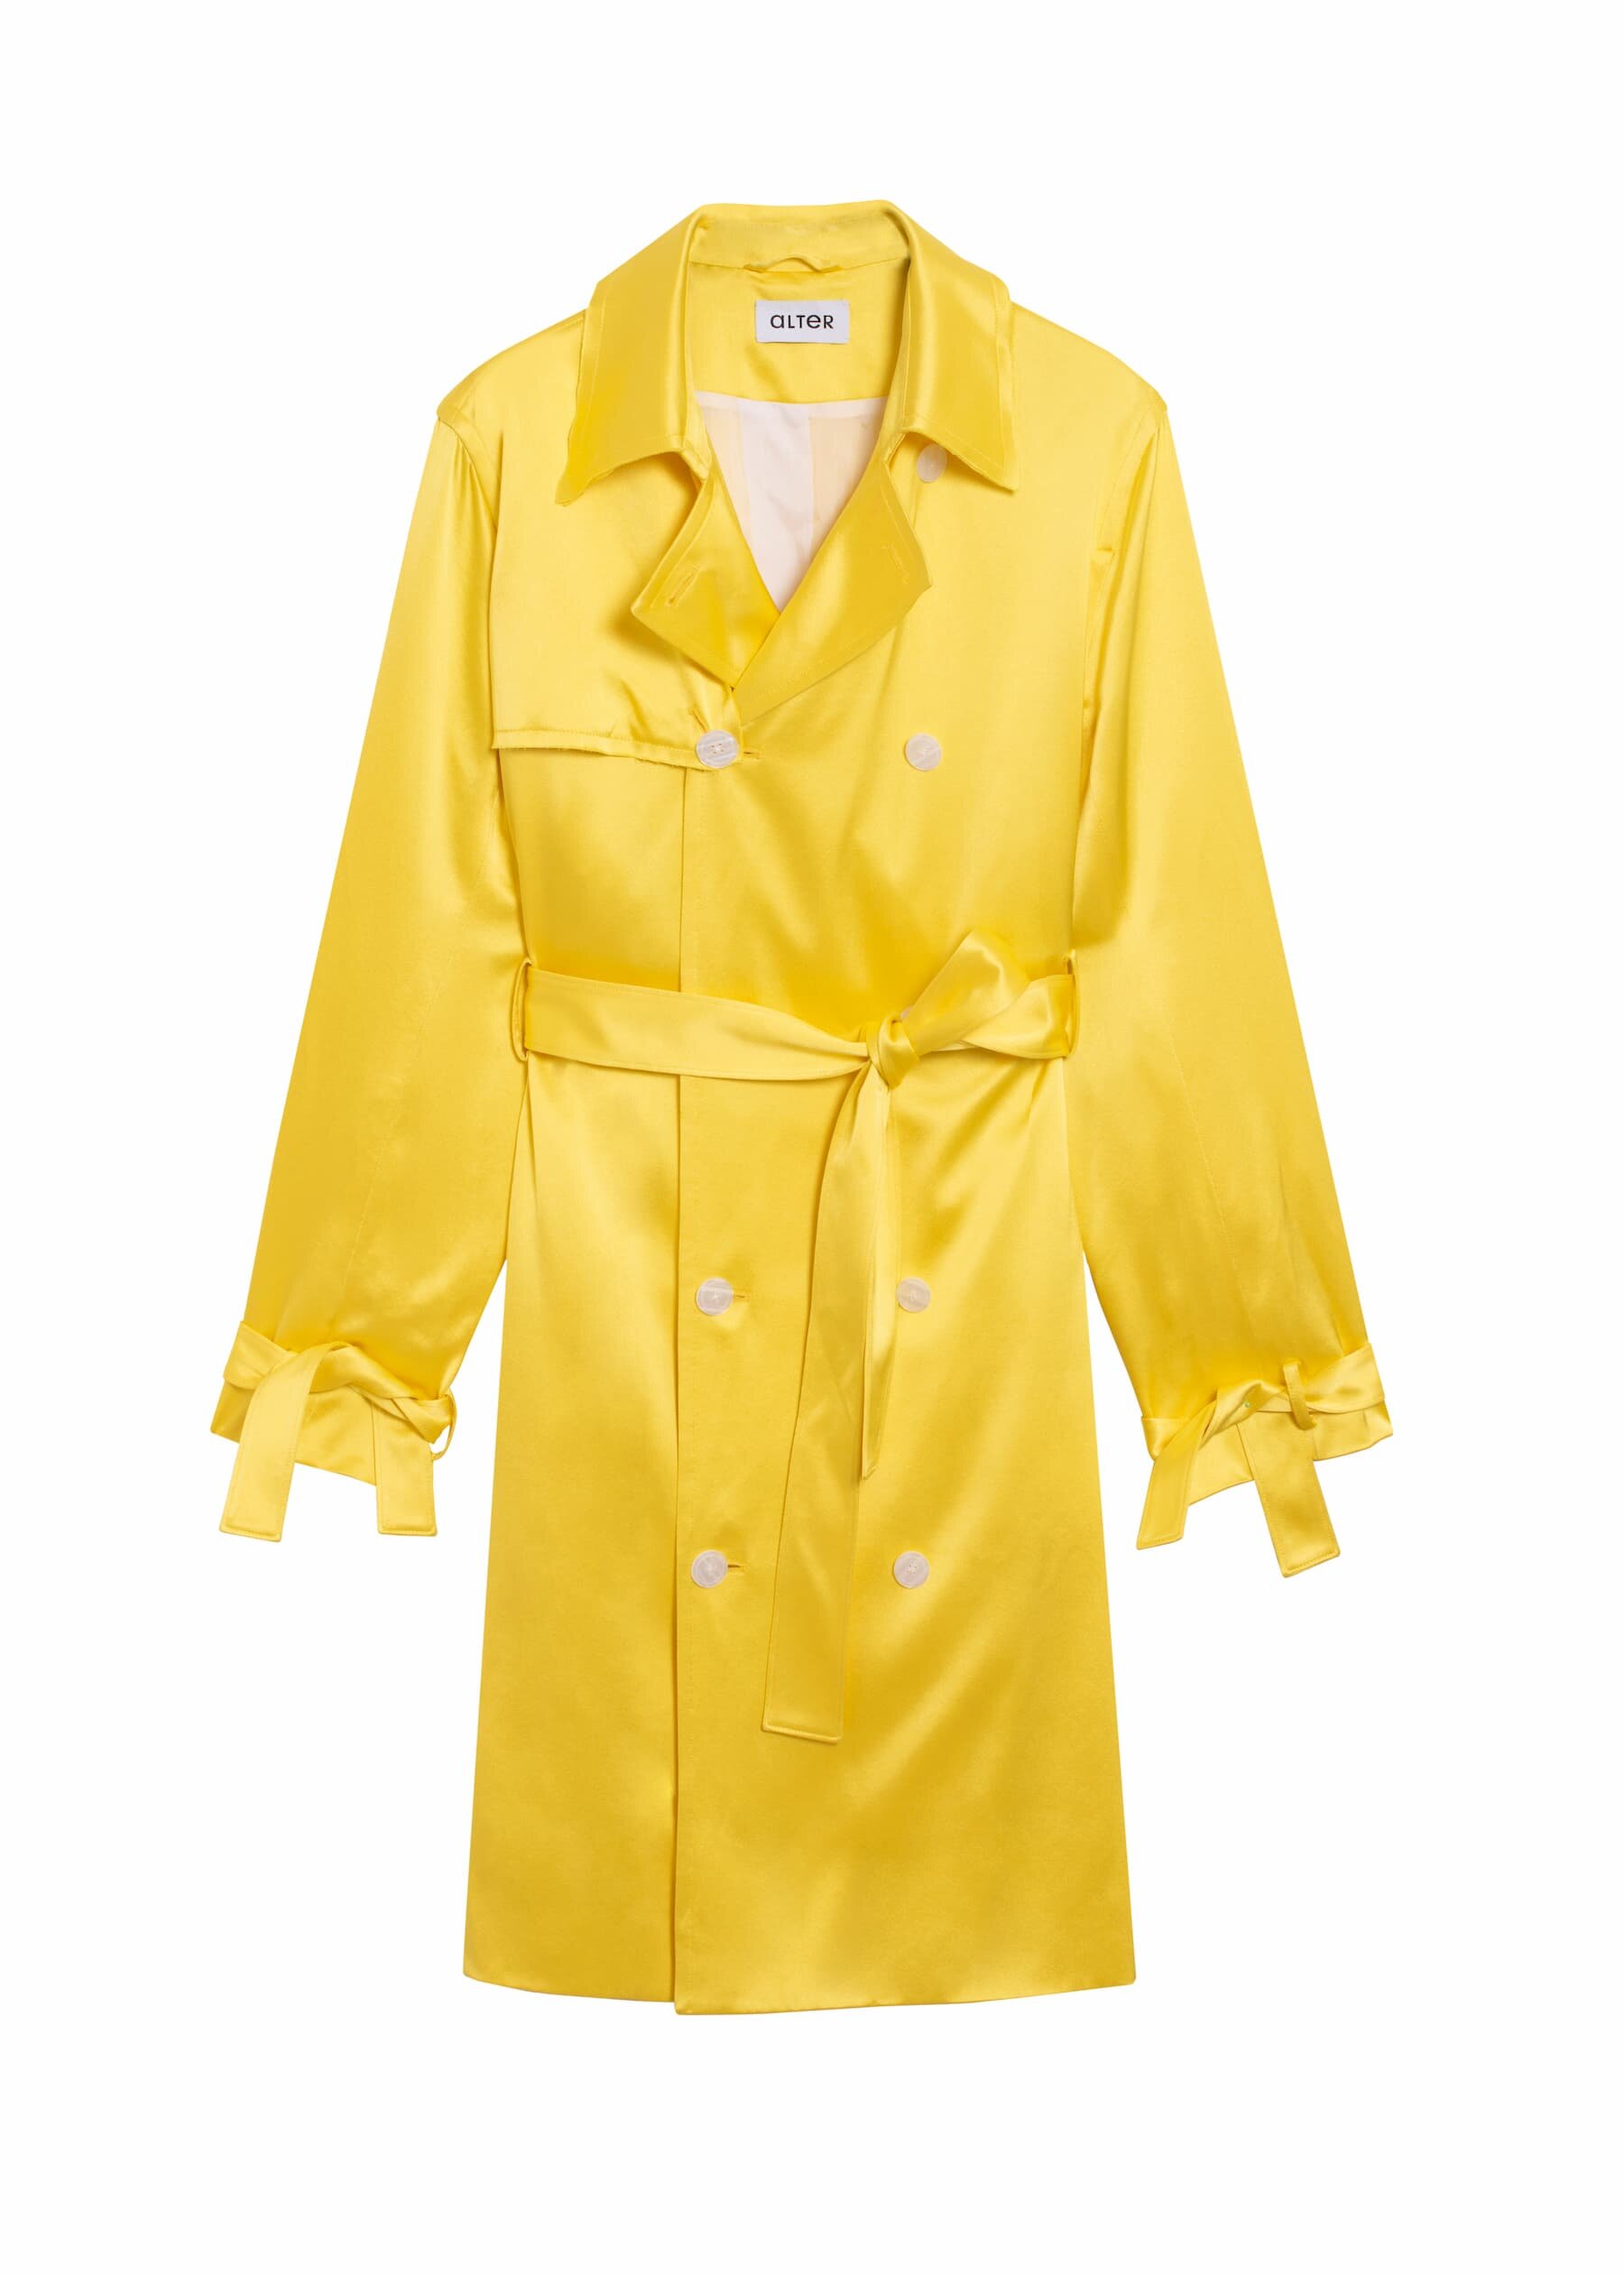 Alter Designs Mid-Length Trench Coat in Yellow Satin.jpg